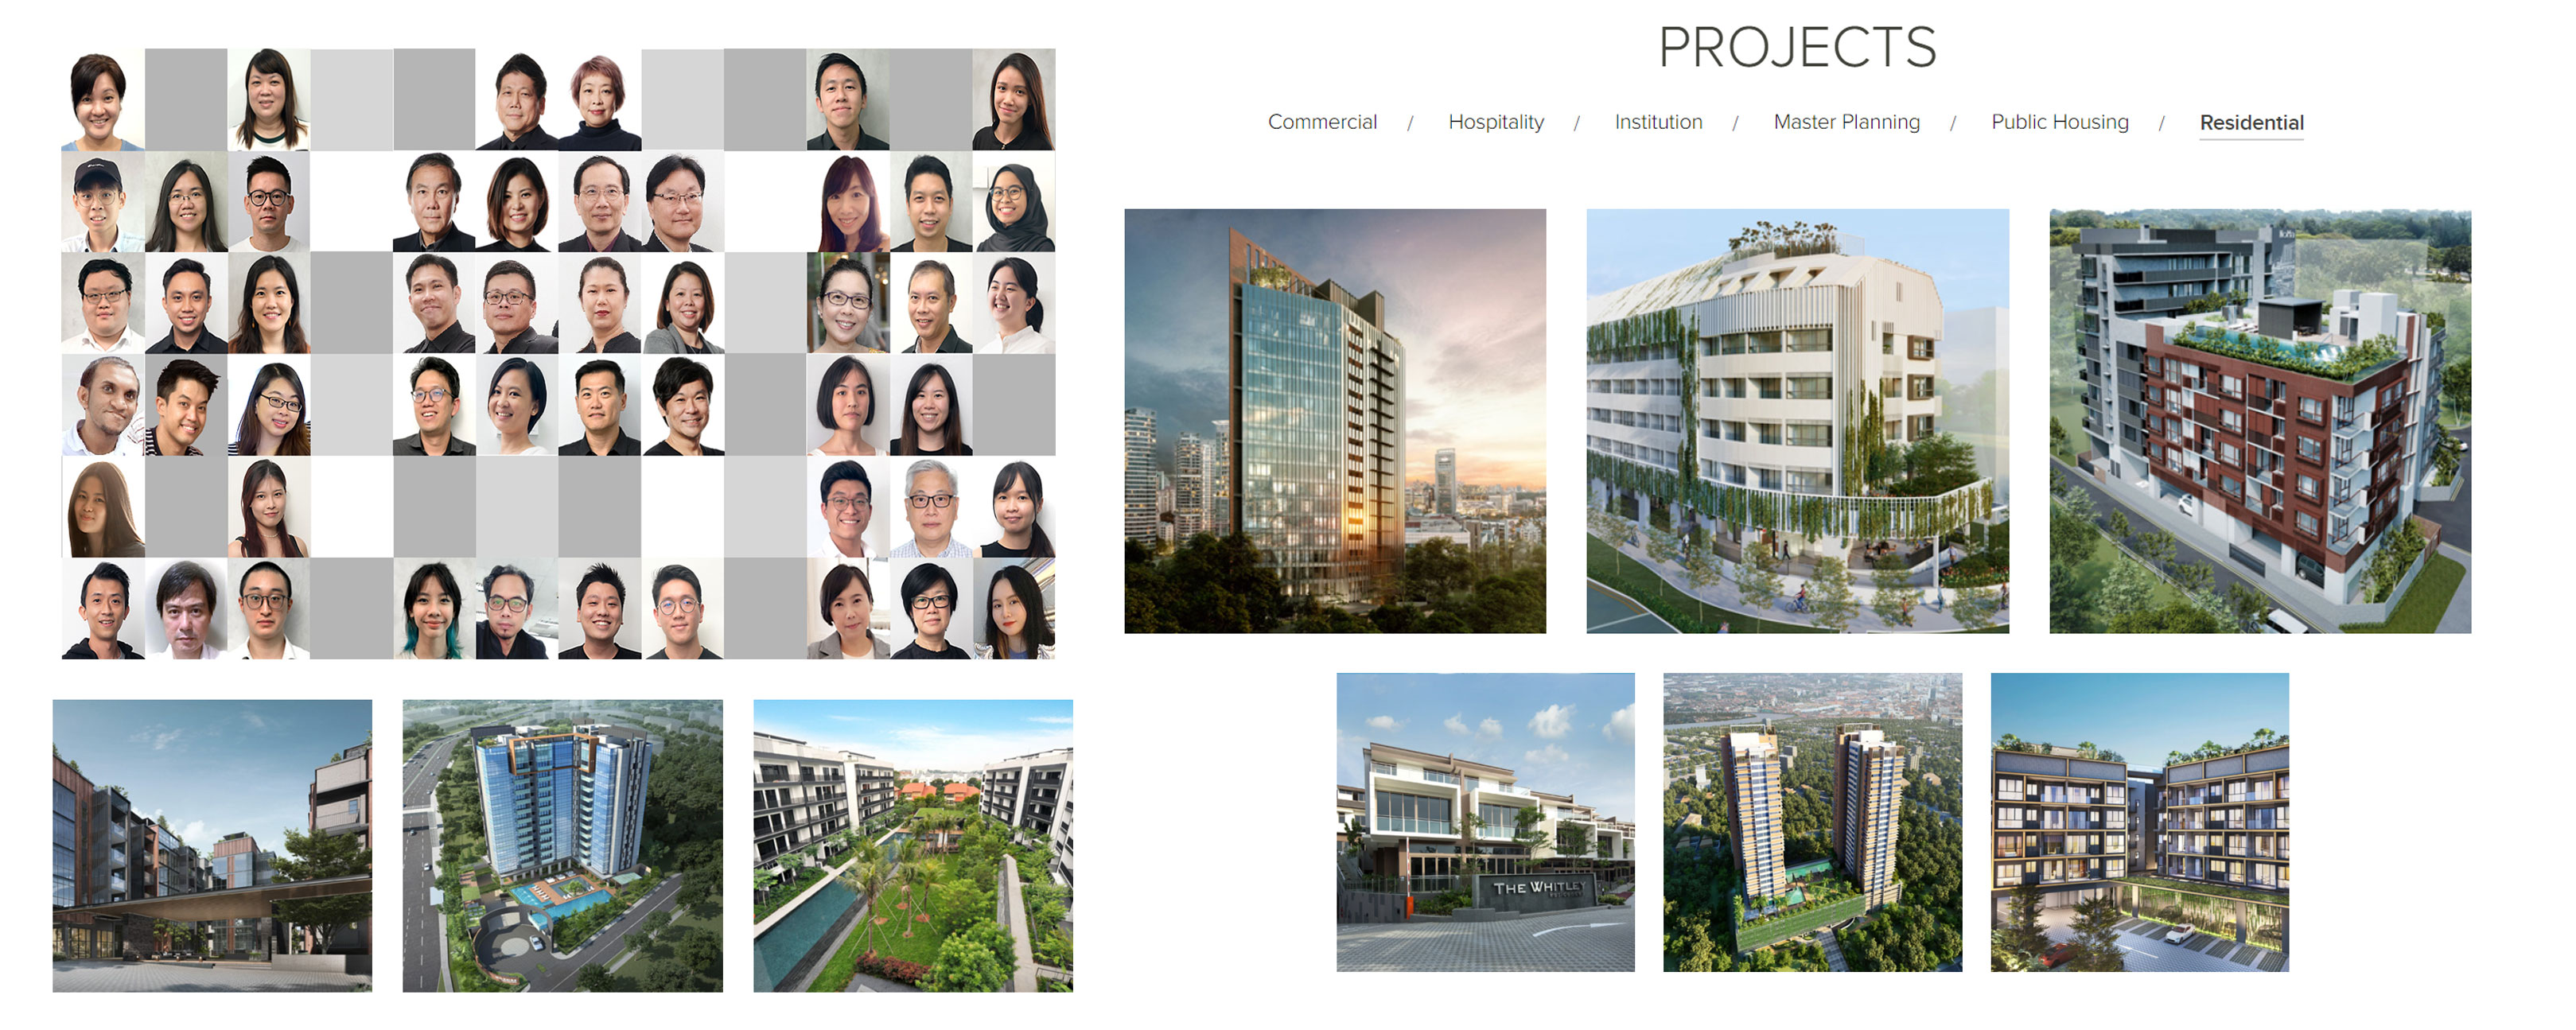 Myra Architect - JGP Architecture is one of the leading architectural firms in Singapore